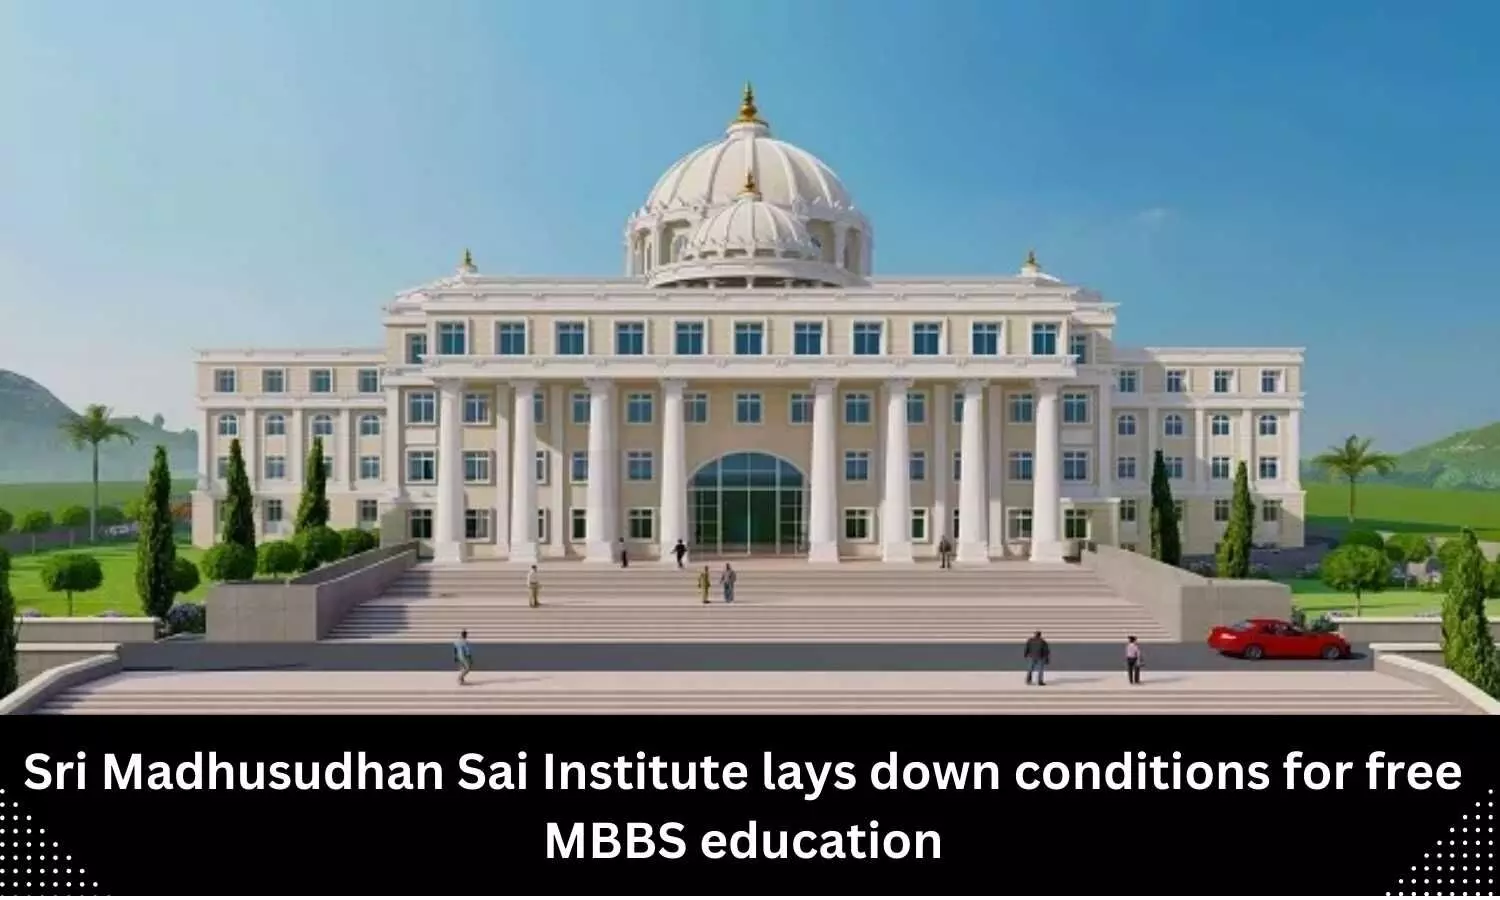 Sri Madhusudhan Sai Institute lays down conditions for free MBBS education